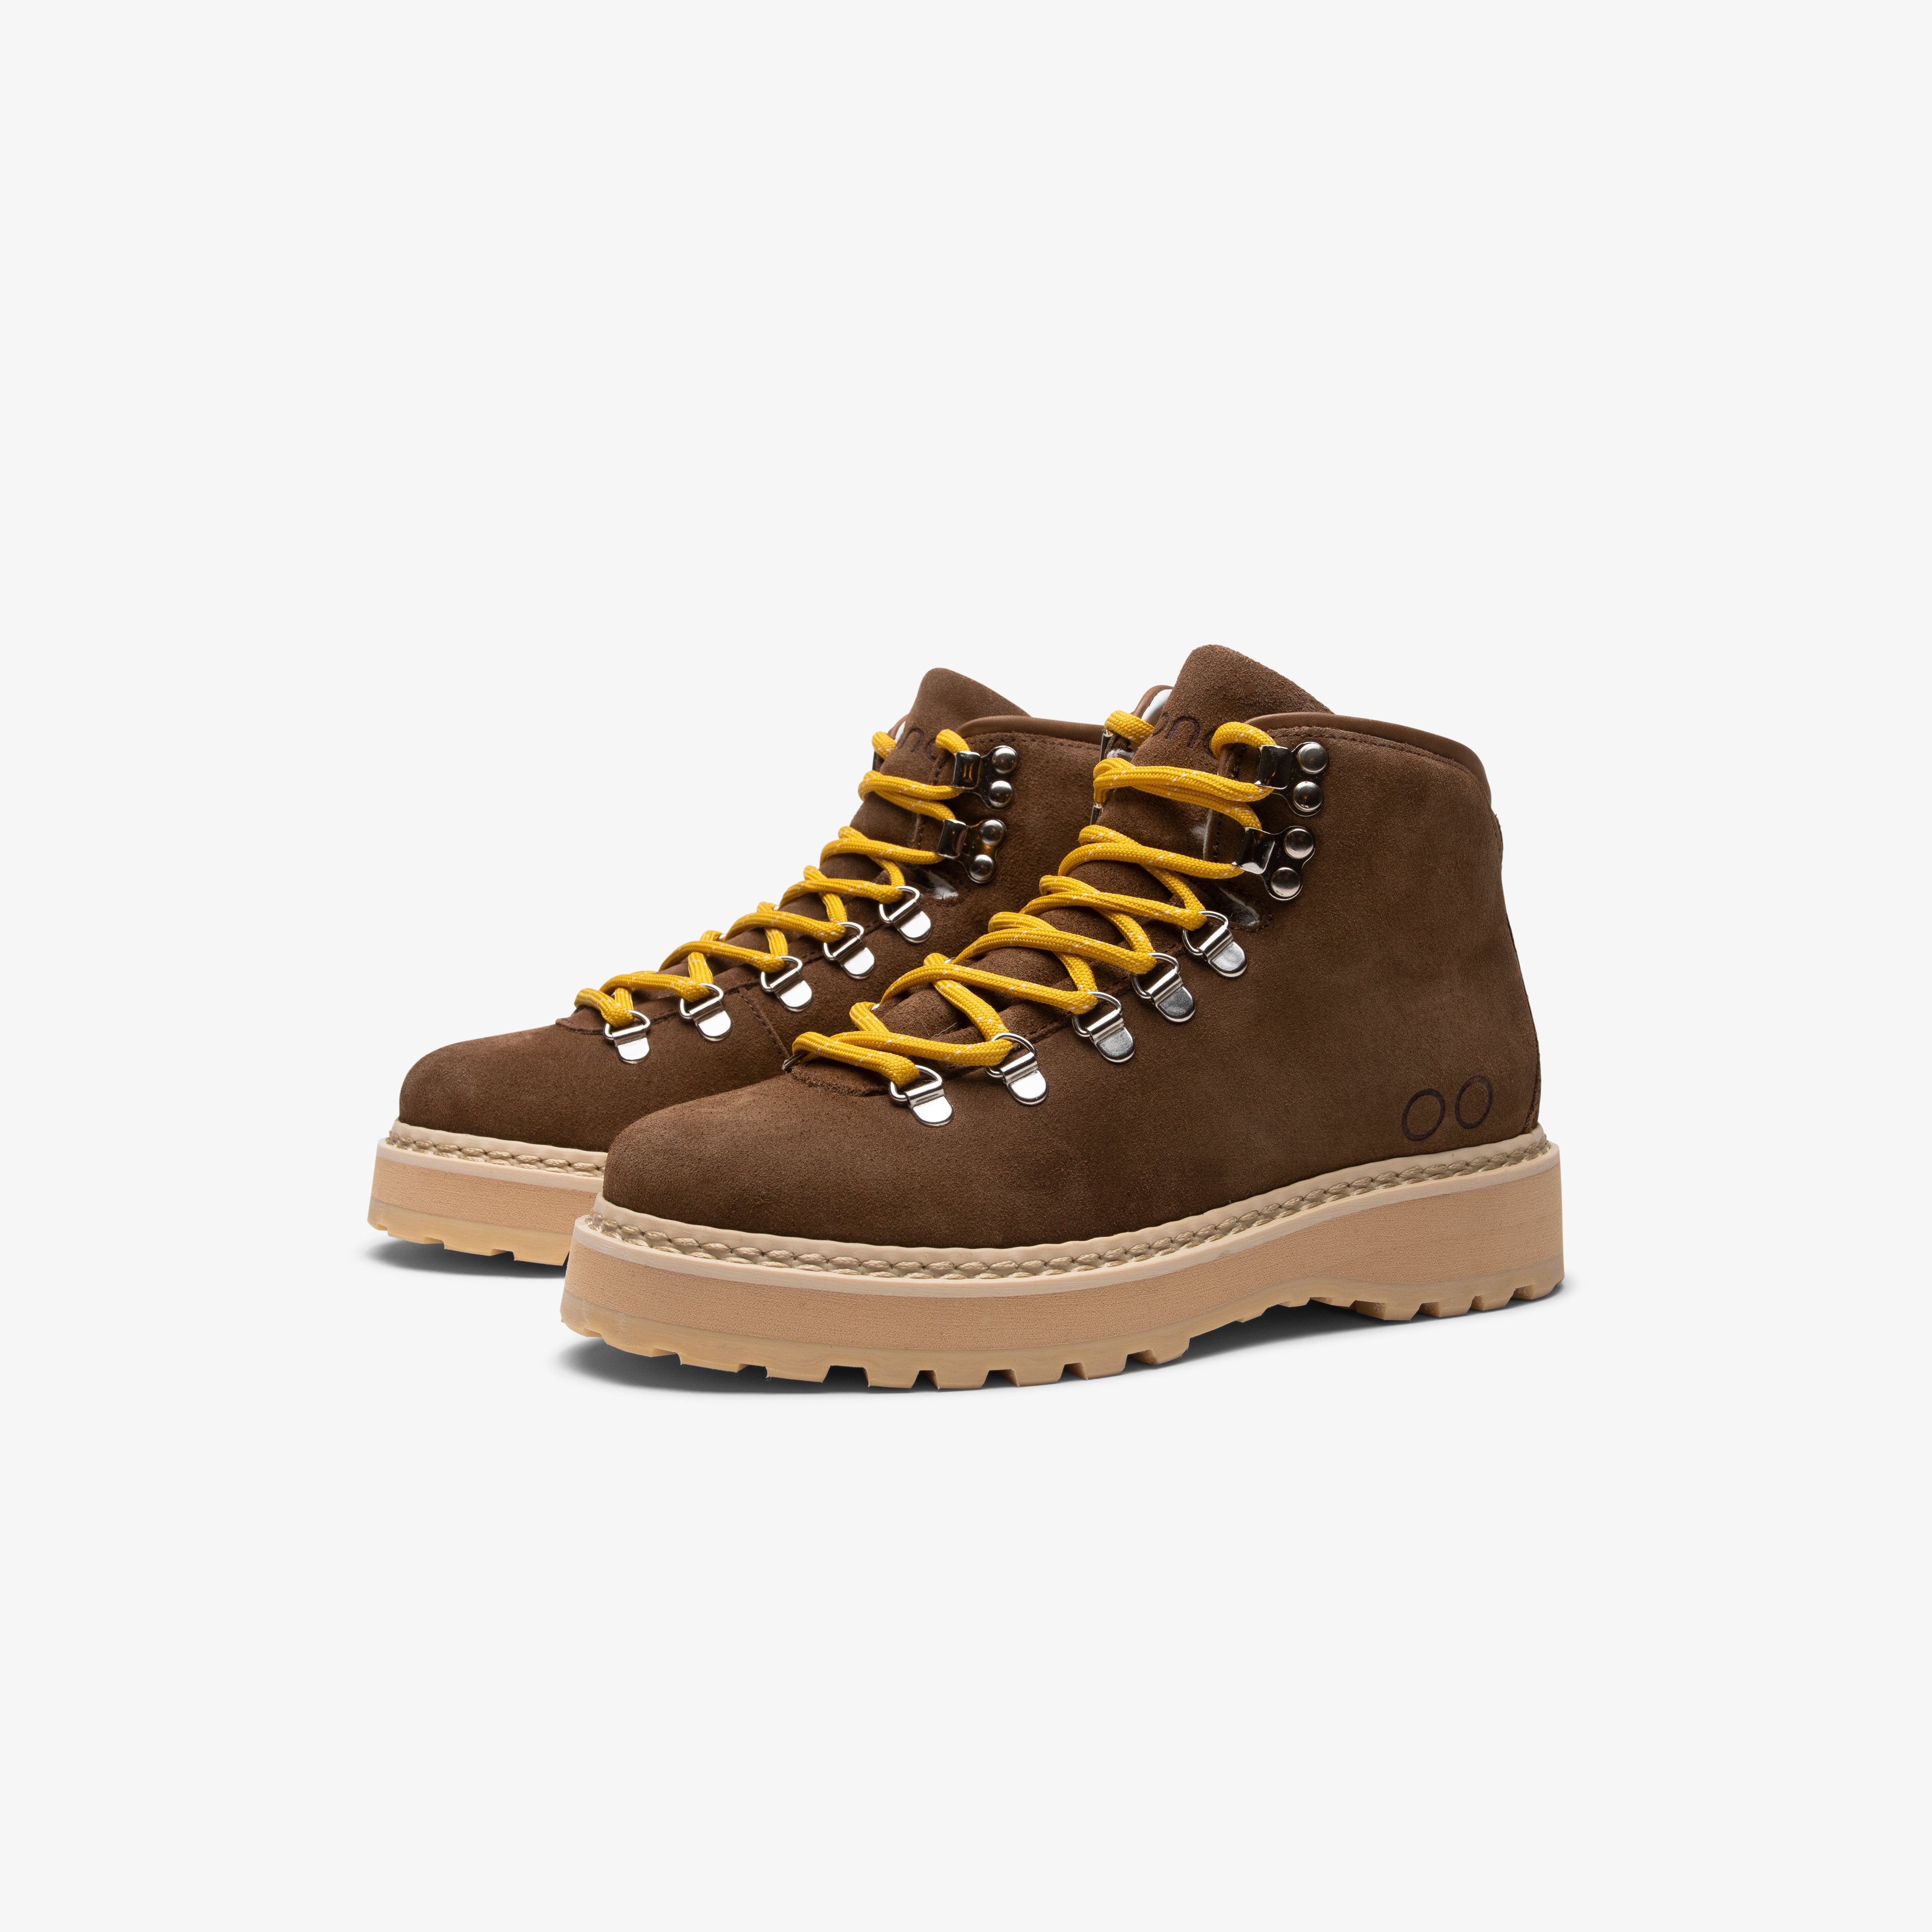 Hiking Core - Suede - Shearling Lining - Mens